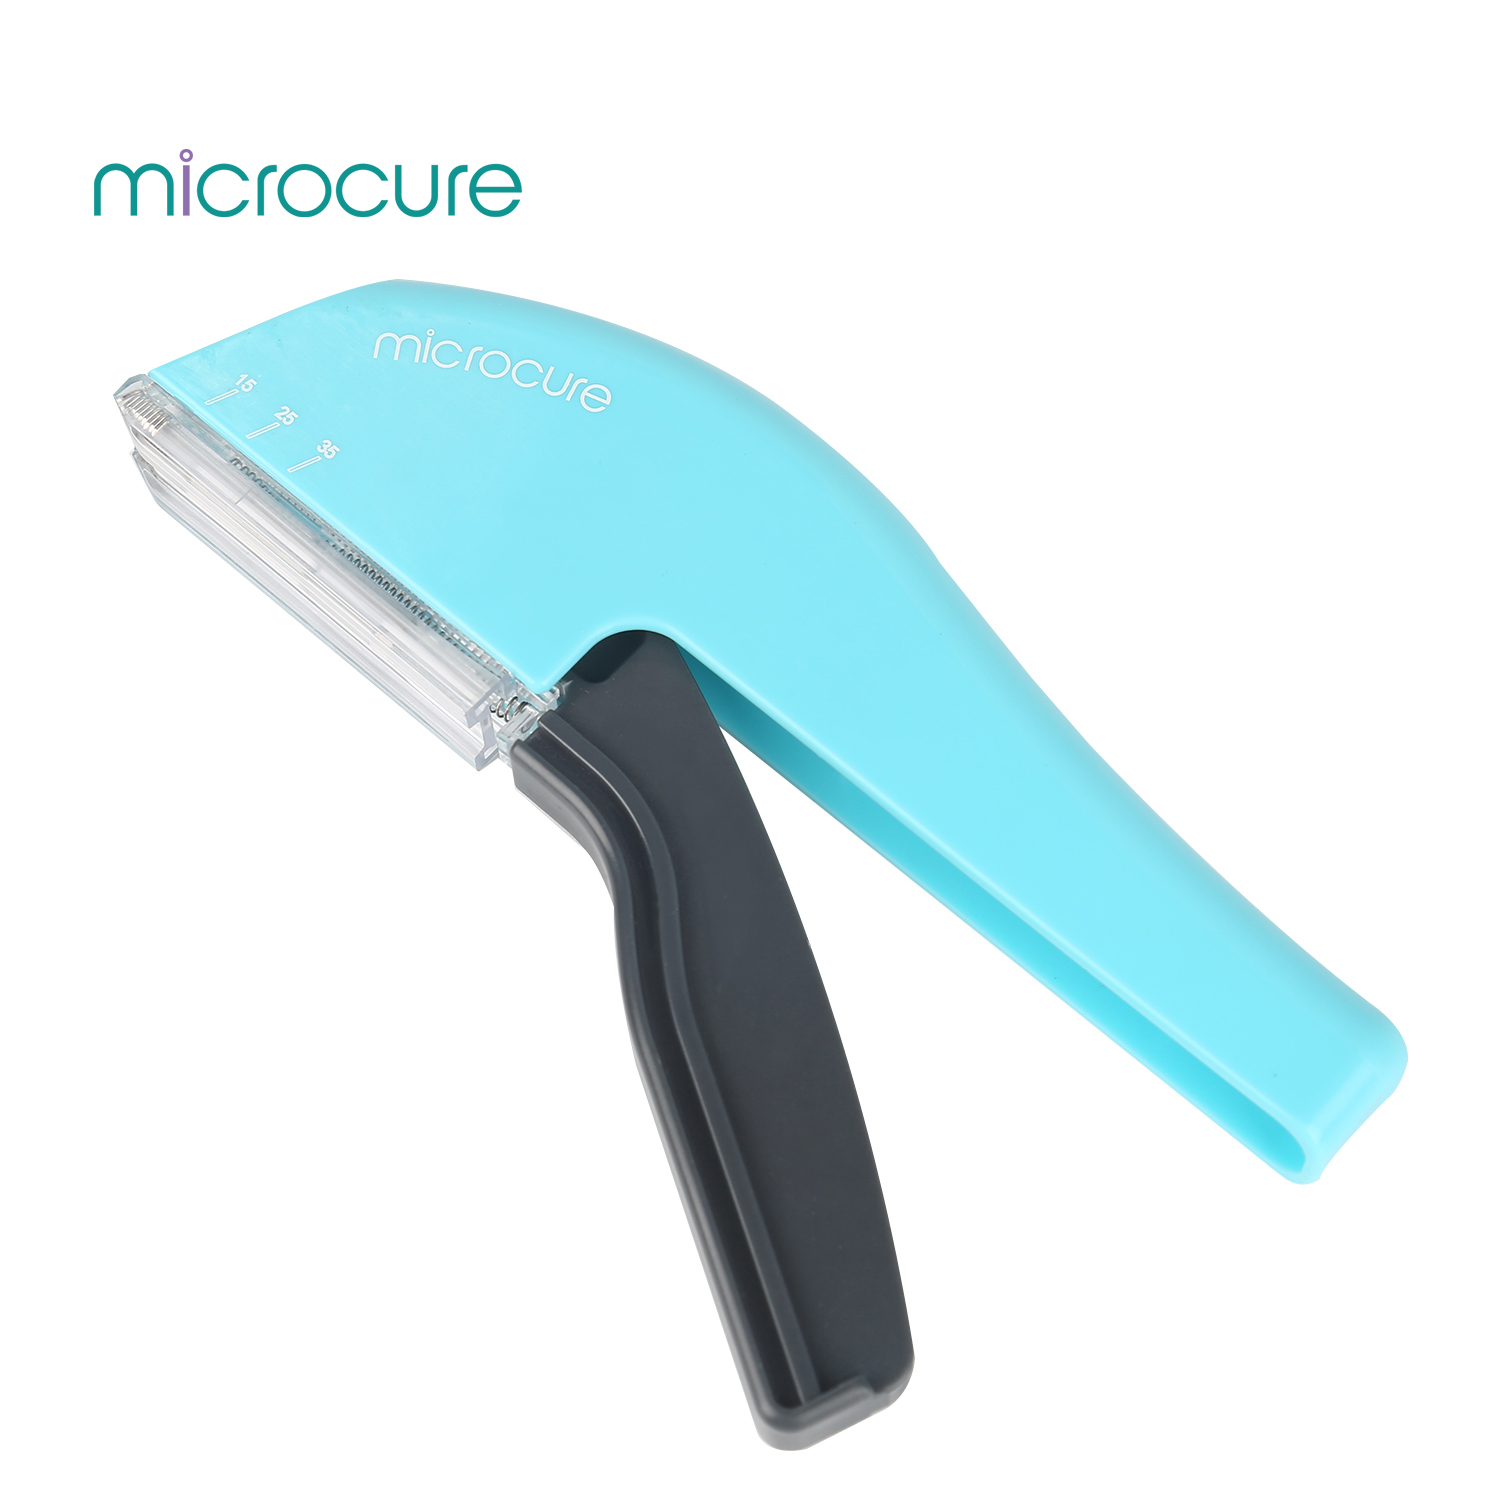 Skin Stapler: Perfect Solution for Quick and Safe Skin Closure